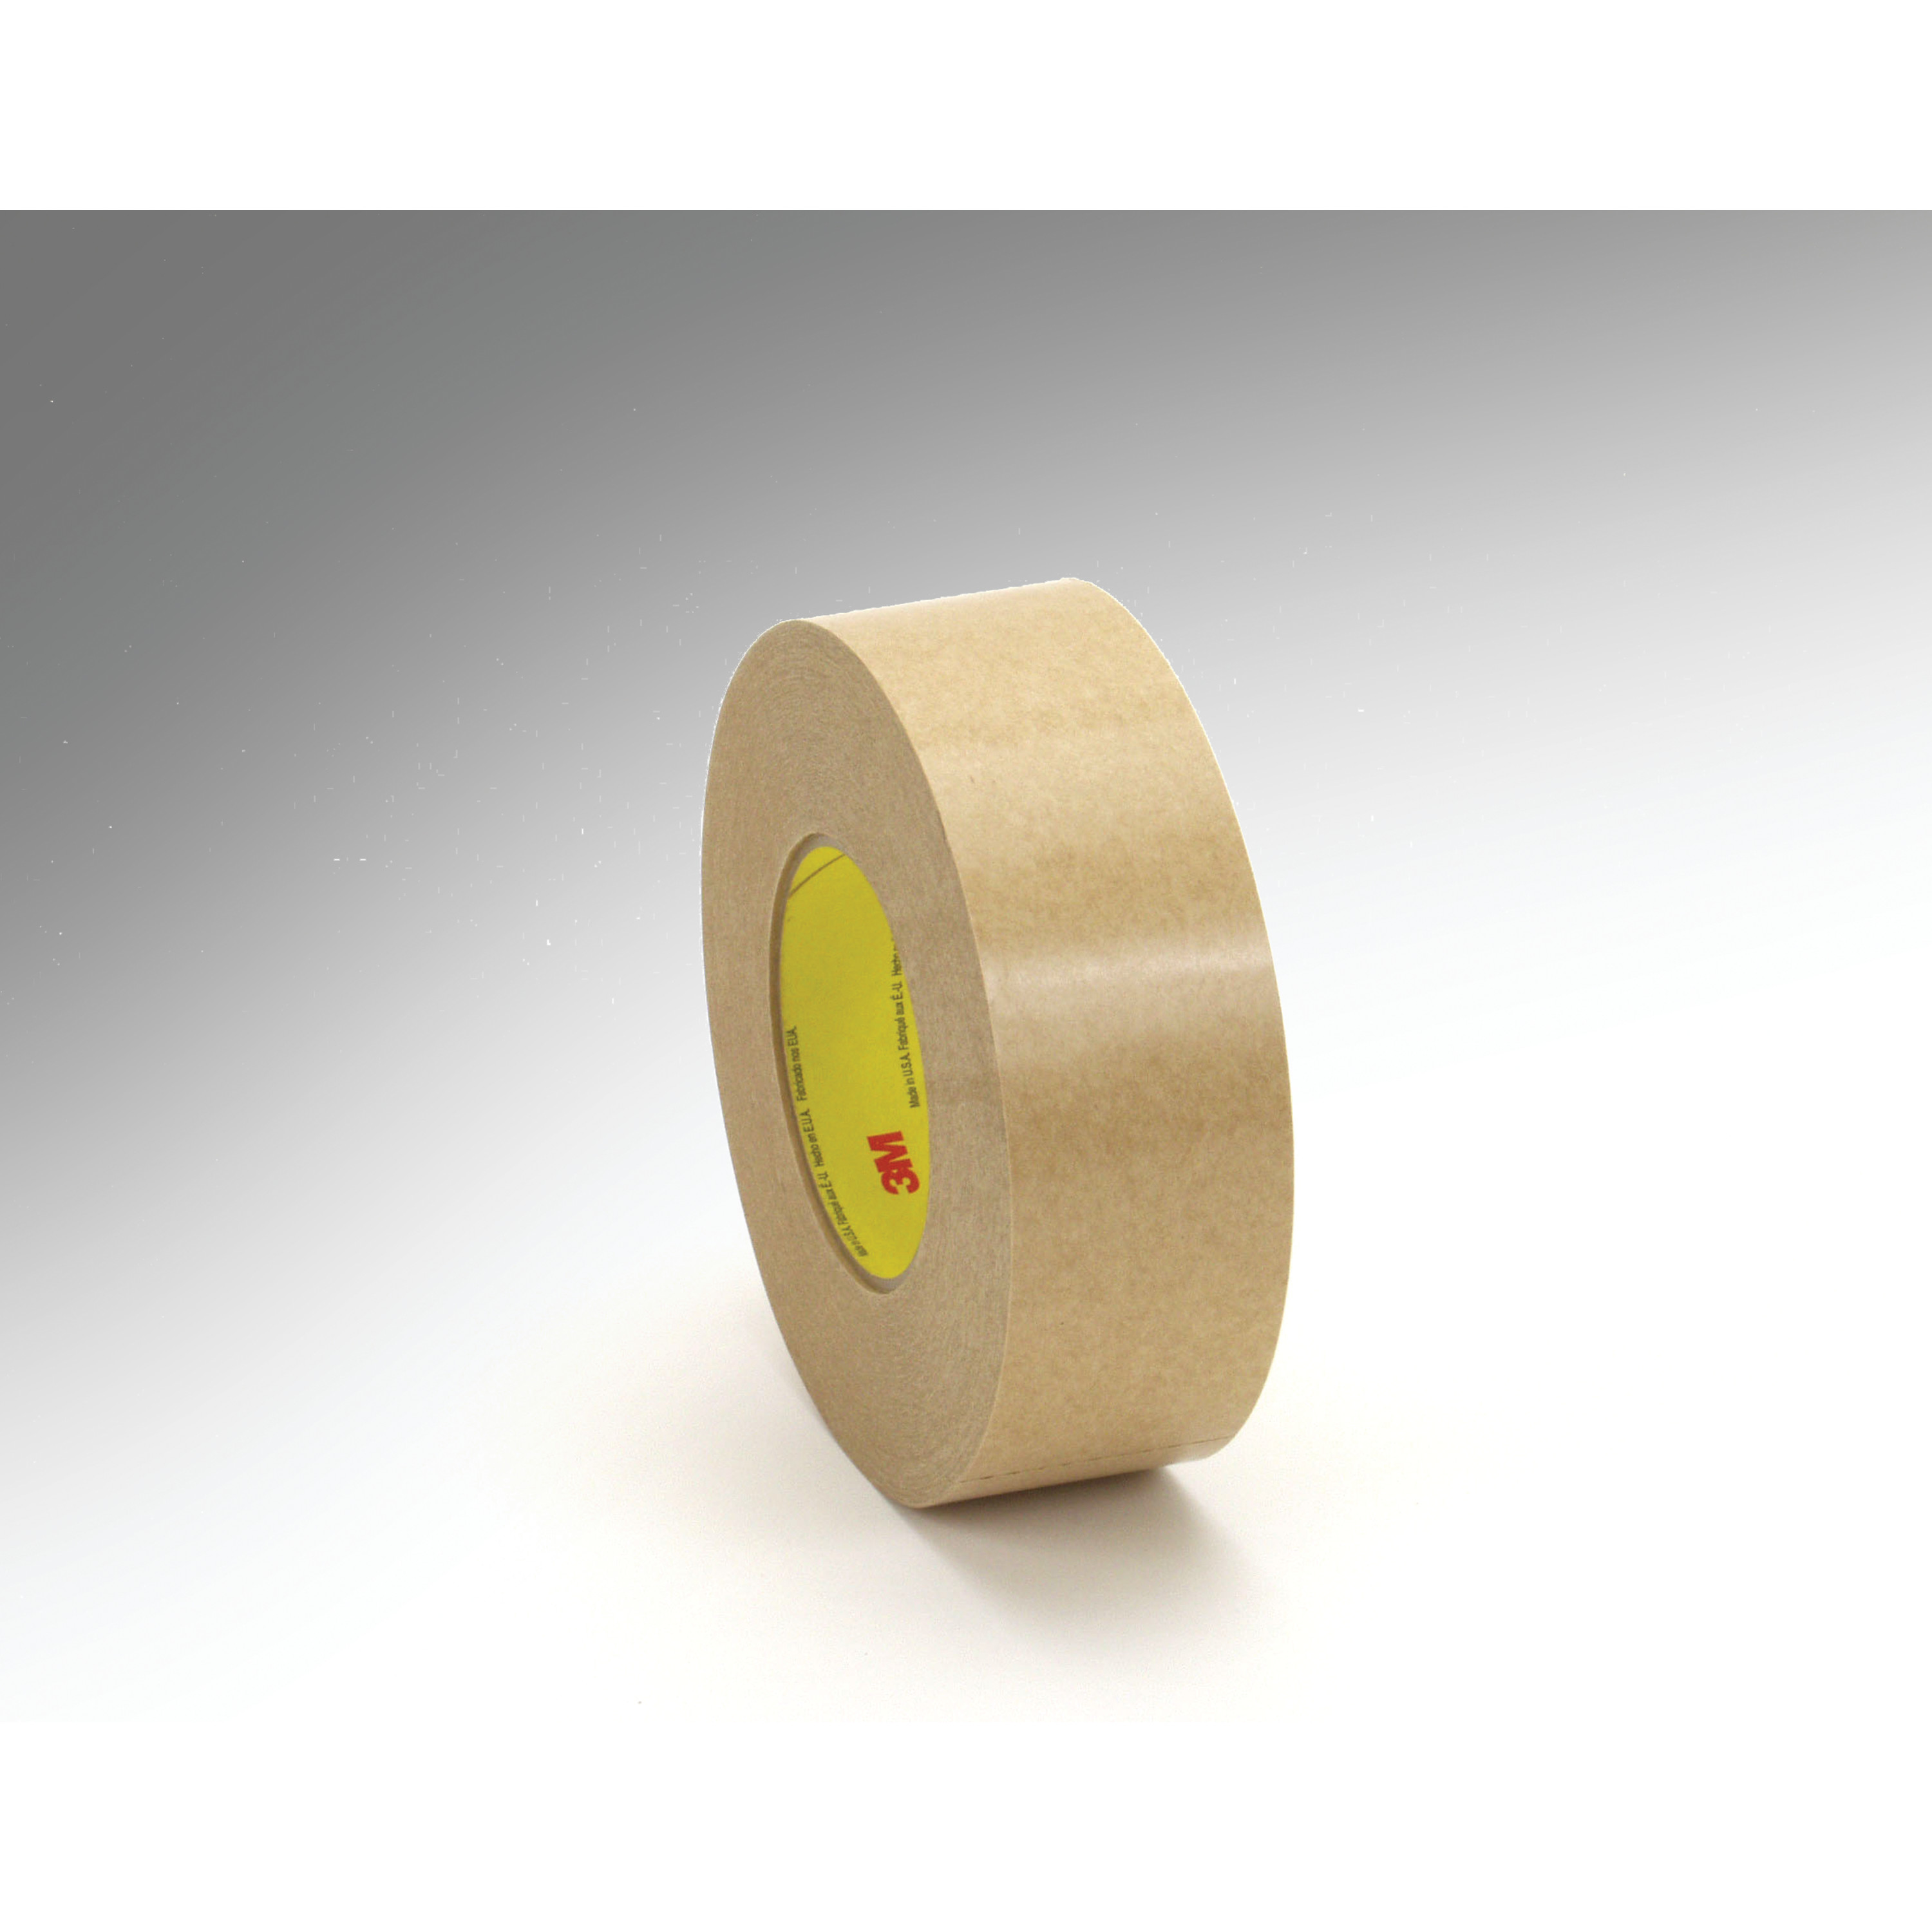 3M™ Adhesive Transfer Tape 9498, Clear, 2 mil, Roll, Config